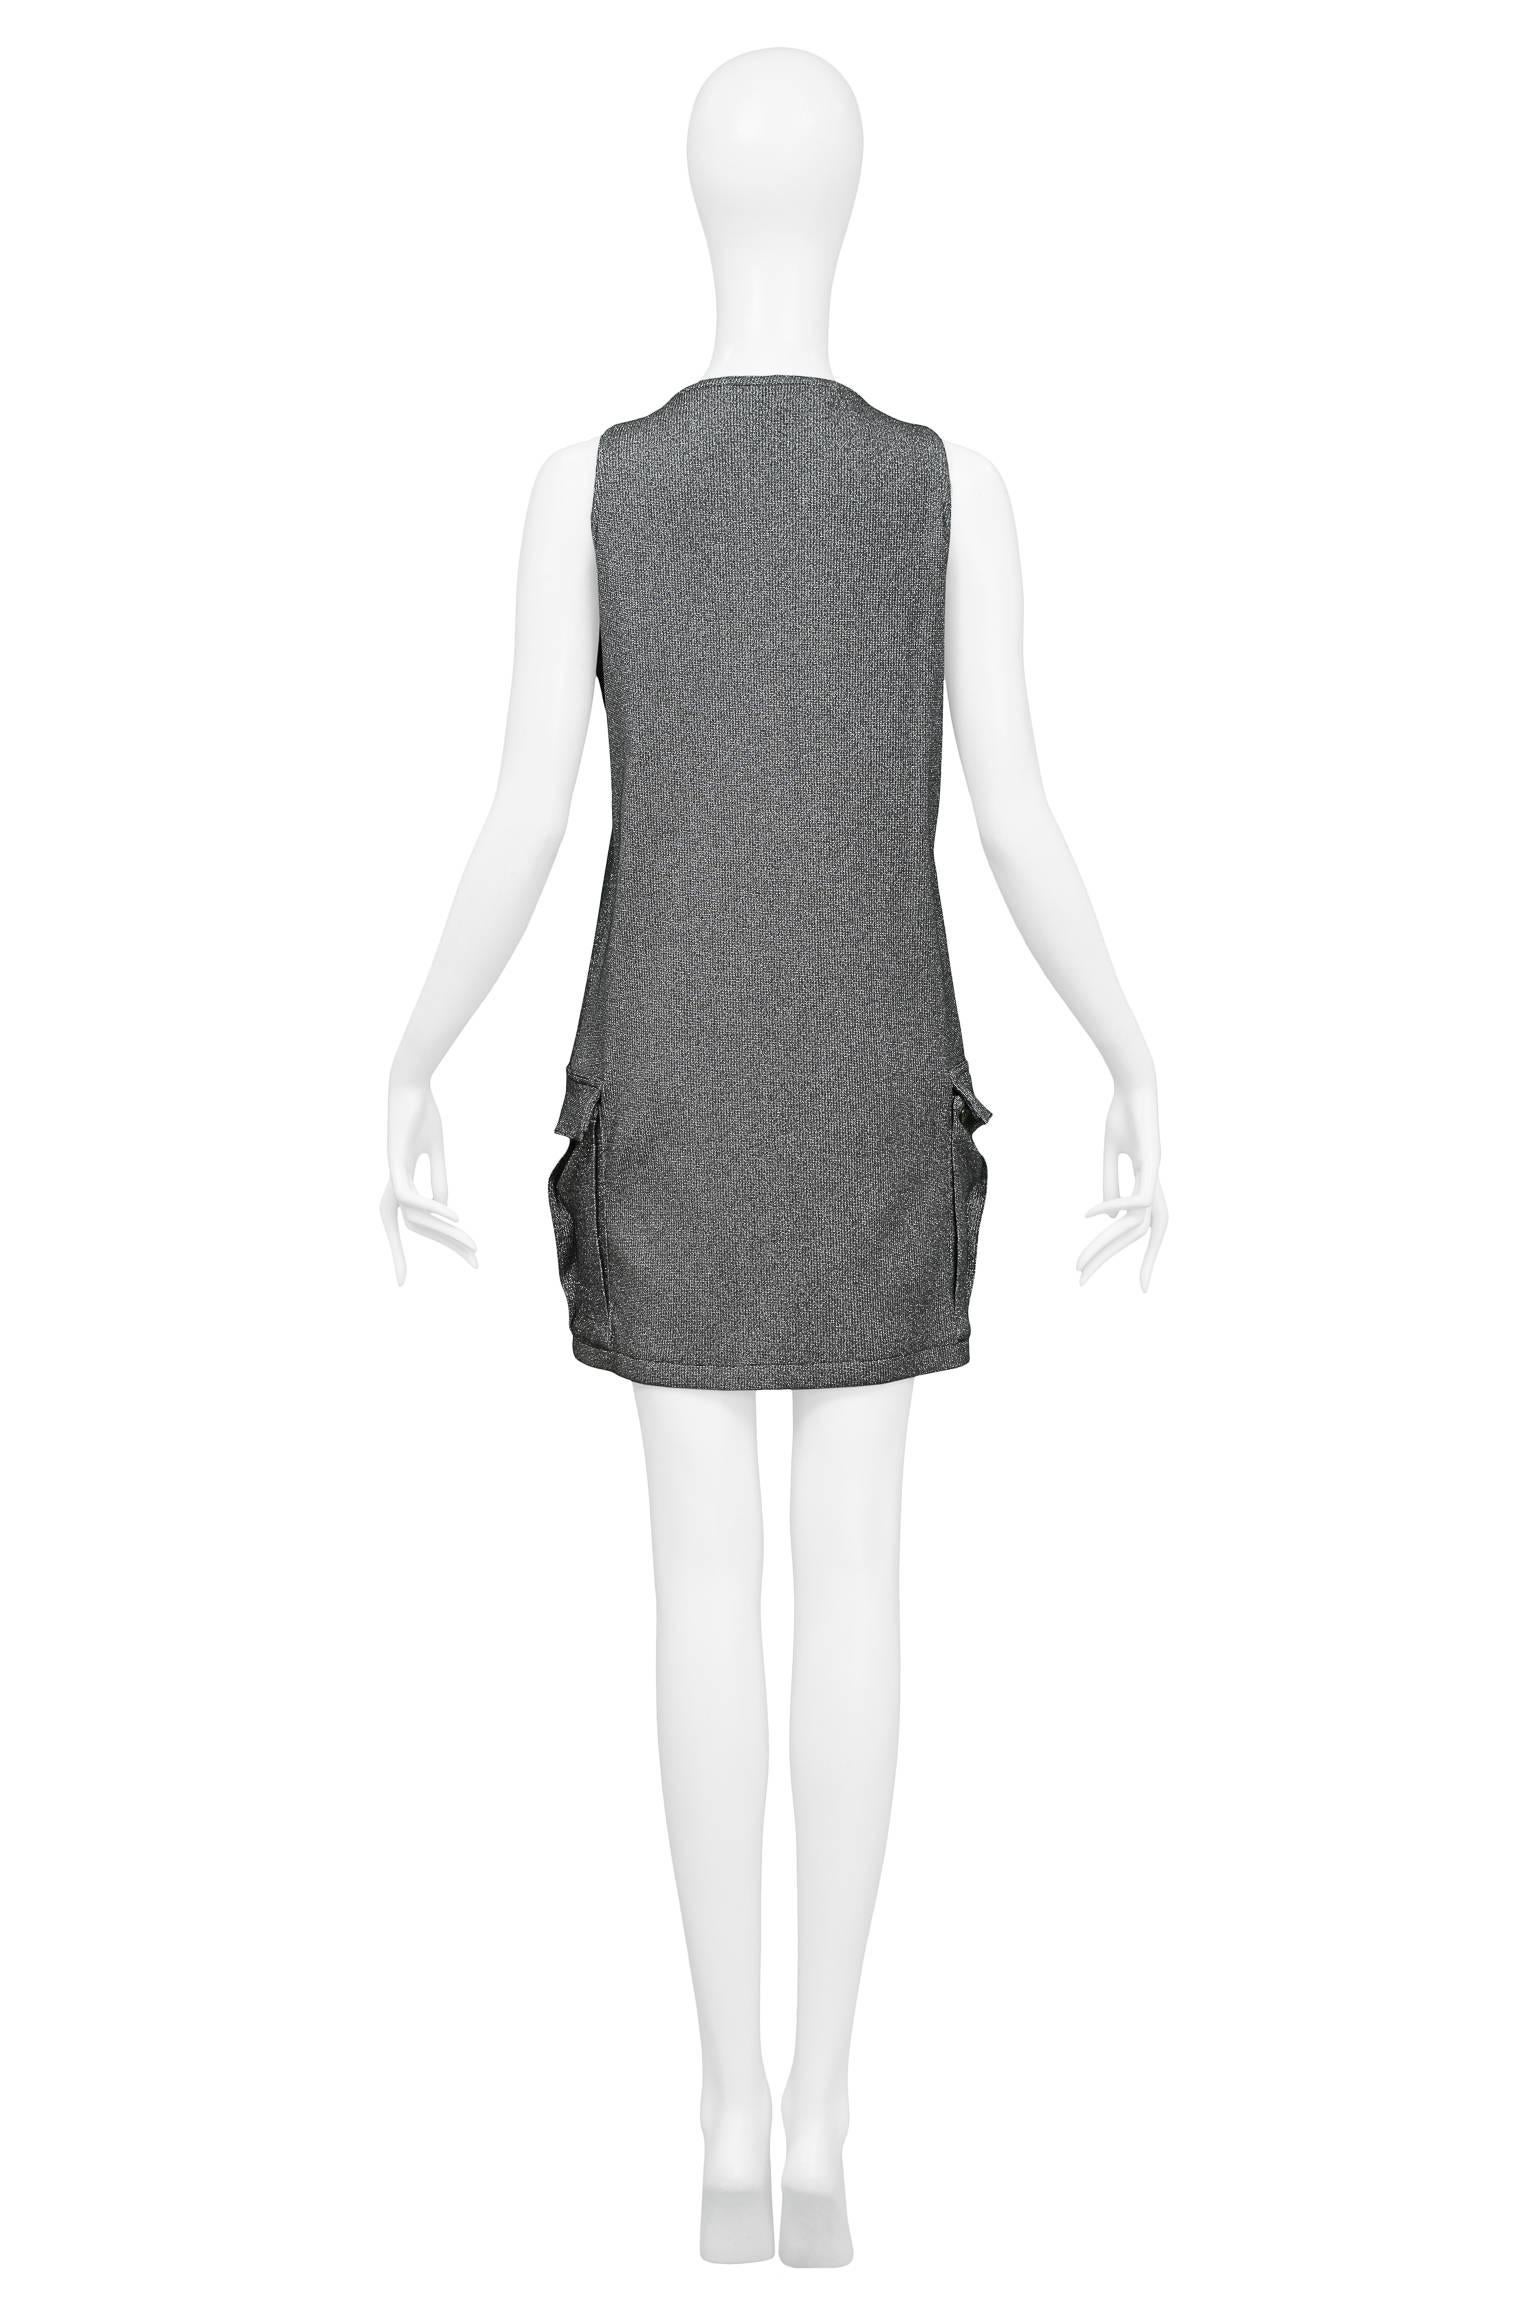 Vintage Stephen Sprouse Metallic Silver Cargo Dress  In Excellent Condition For Sale In Los Angeles, CA